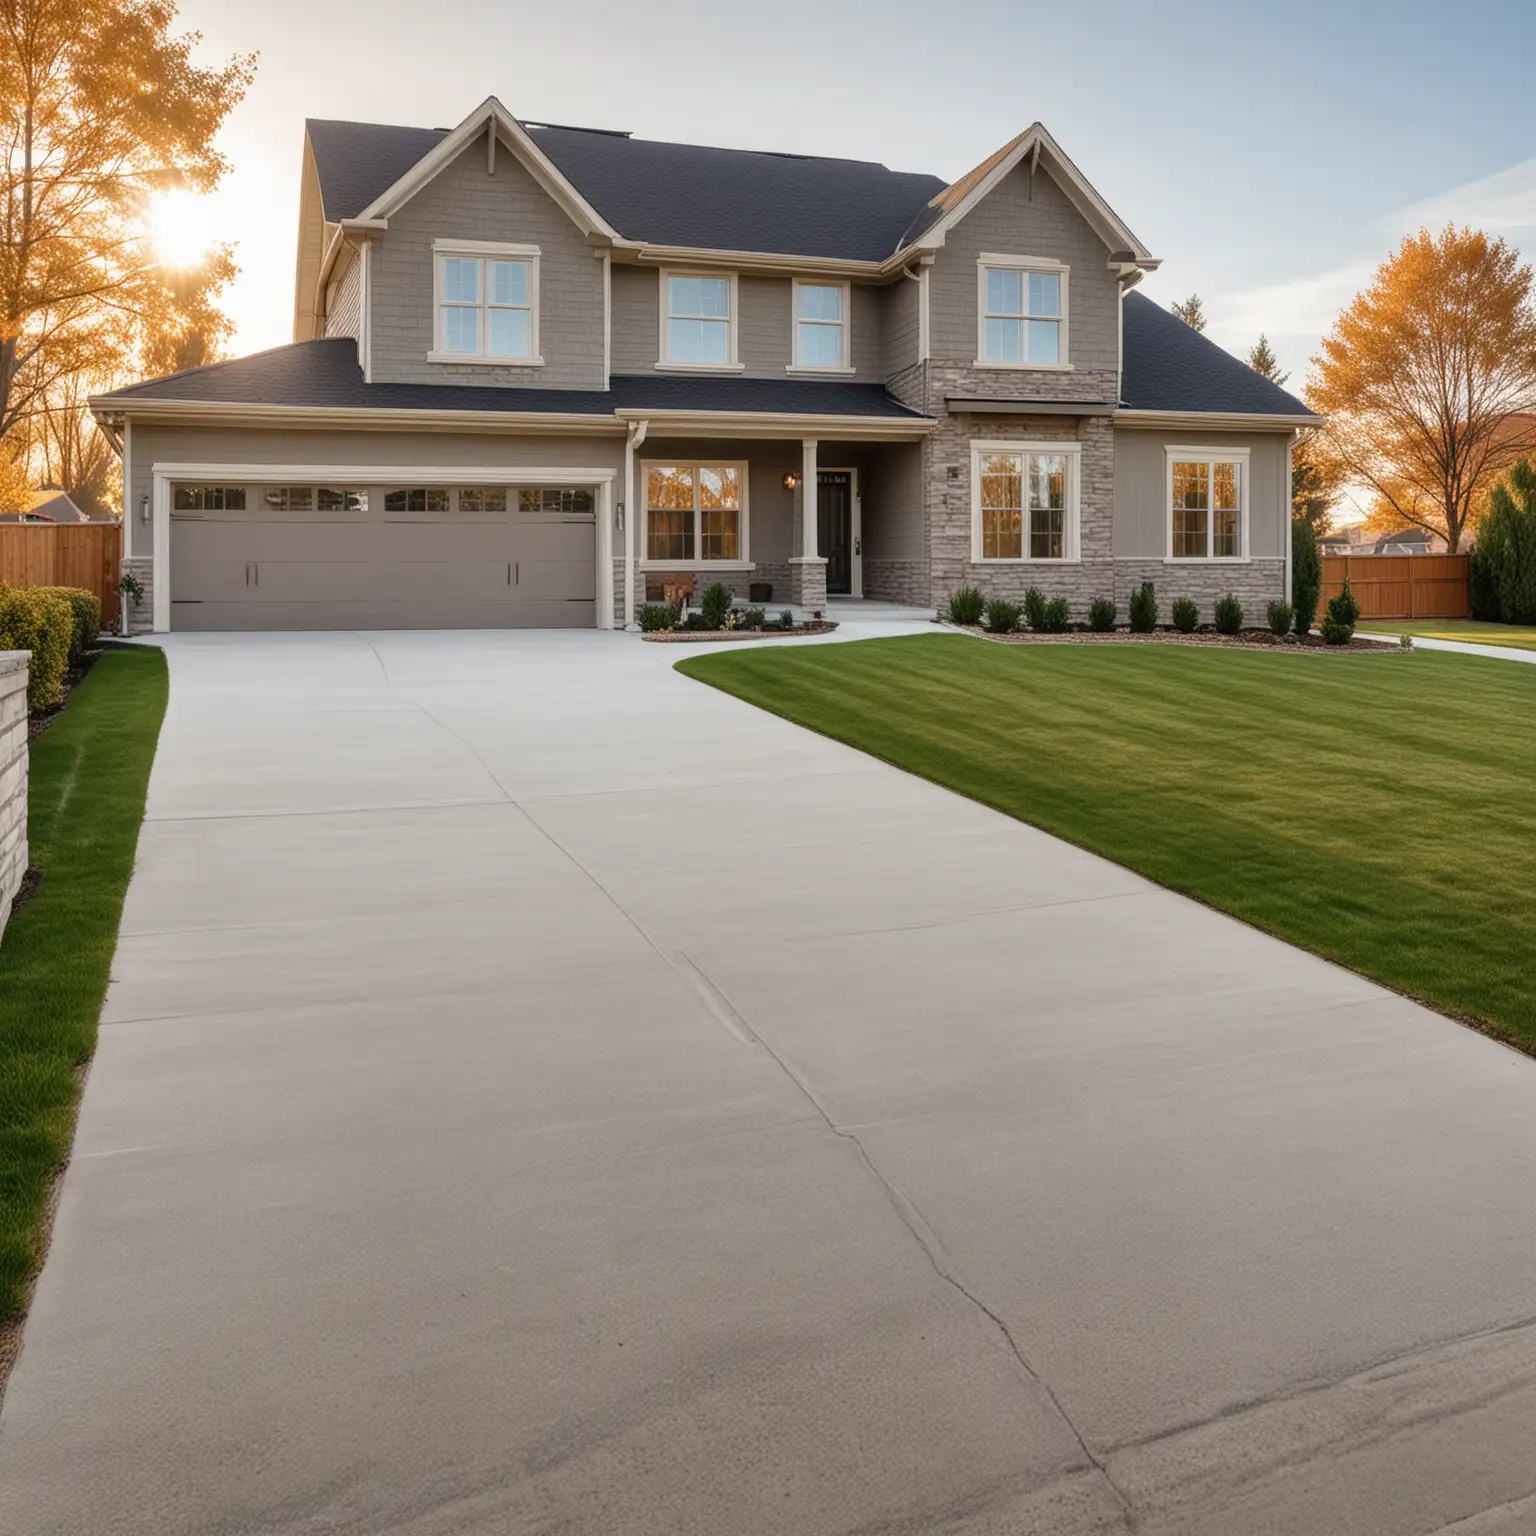 realistic photo of a new house with a long driveway point of view on a sunny day no trees